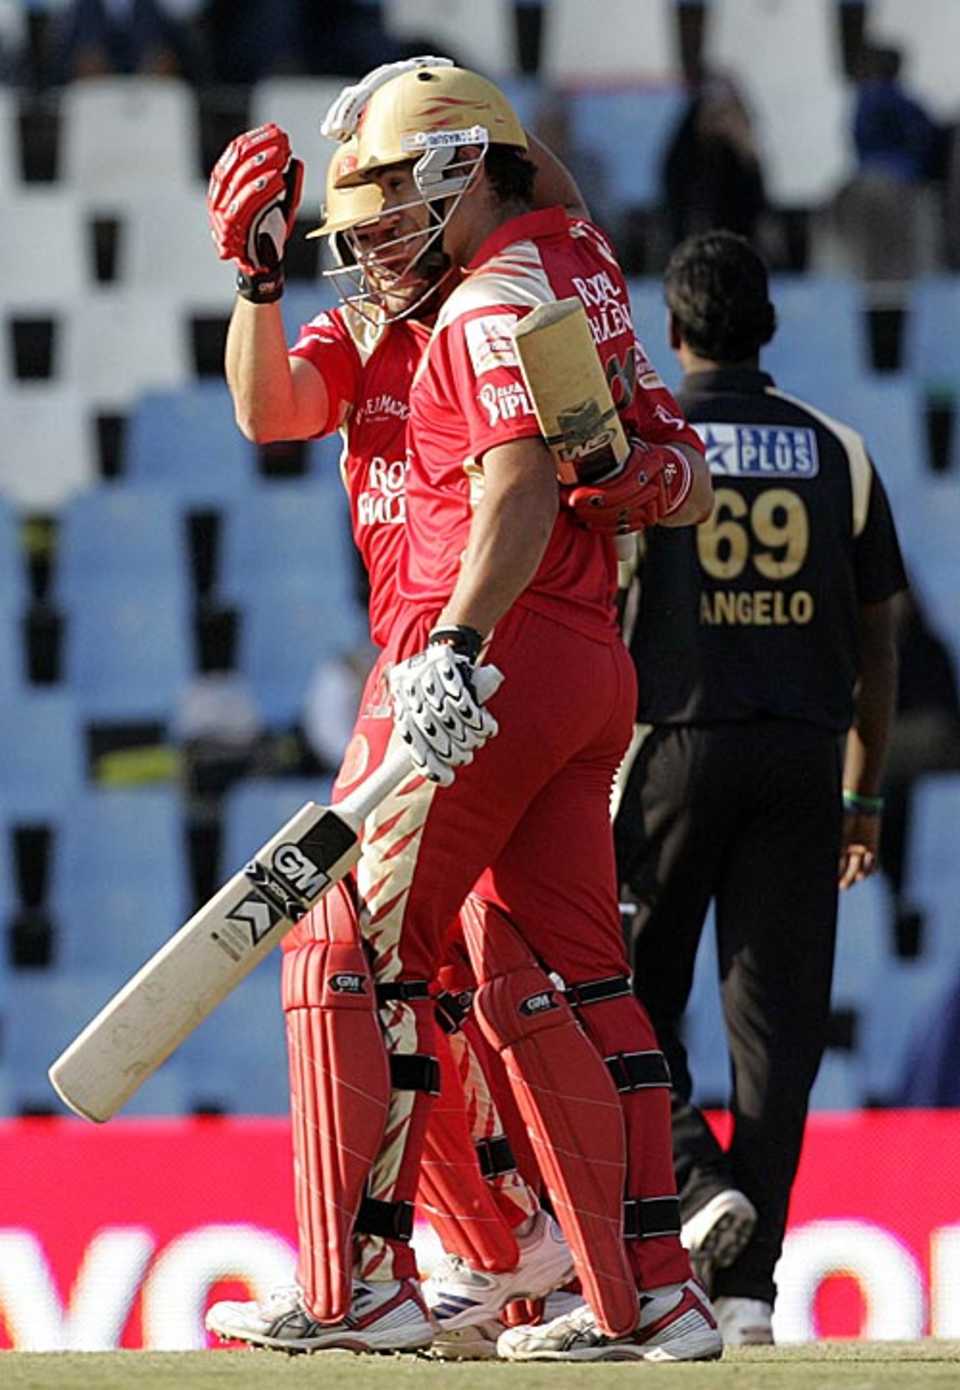 Ross Taylor and Mark Boucher embrace after sealing a tense six-wicket win, Kolkata Knight Riders v Royal Challengers Bangalore, IPL, Centurion, May 12, 2009